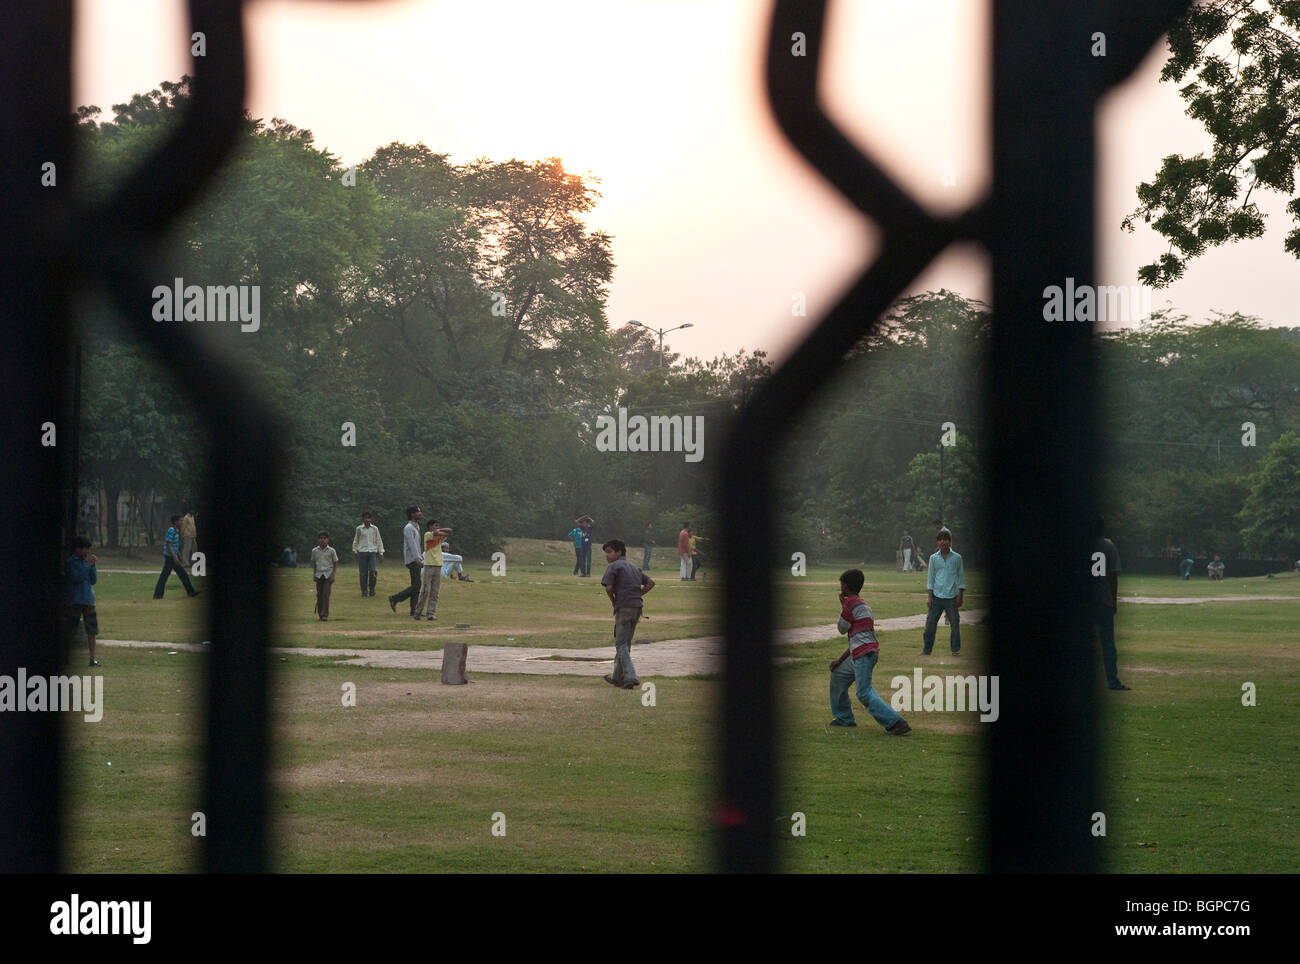 Children playing cricket in a park at dusk, Delhi, India Stock Photo